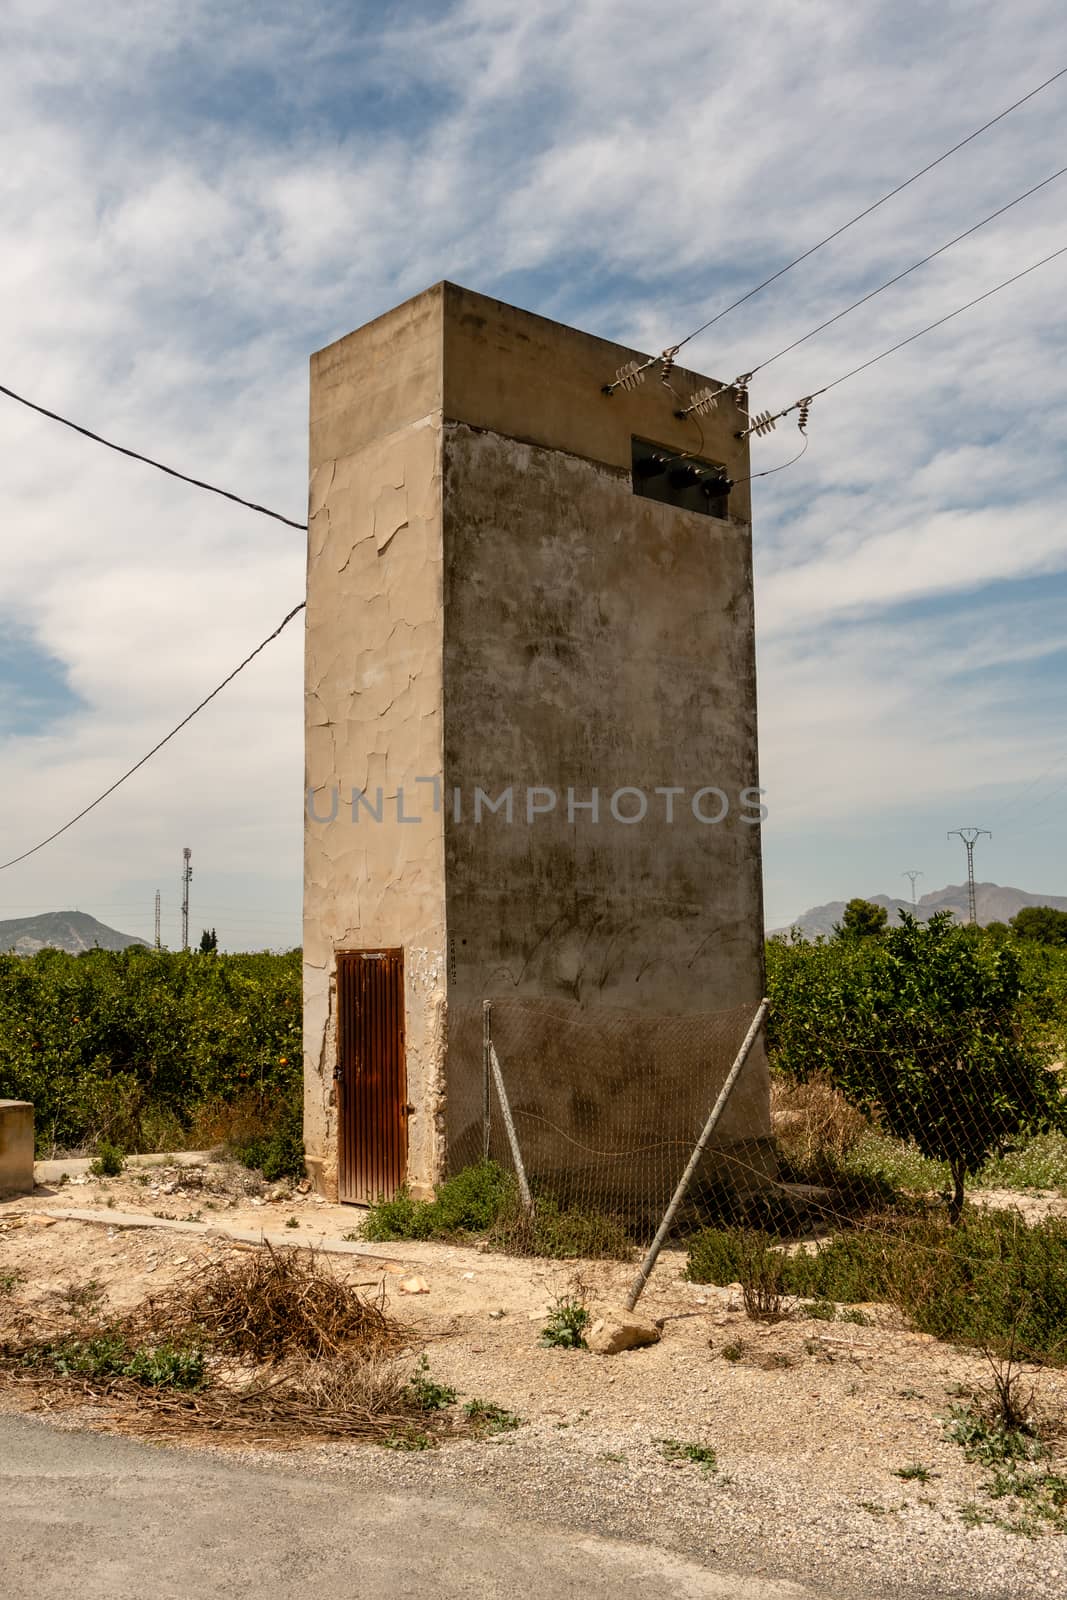 Unusual power ditribution building for local supply of electricity in Spain